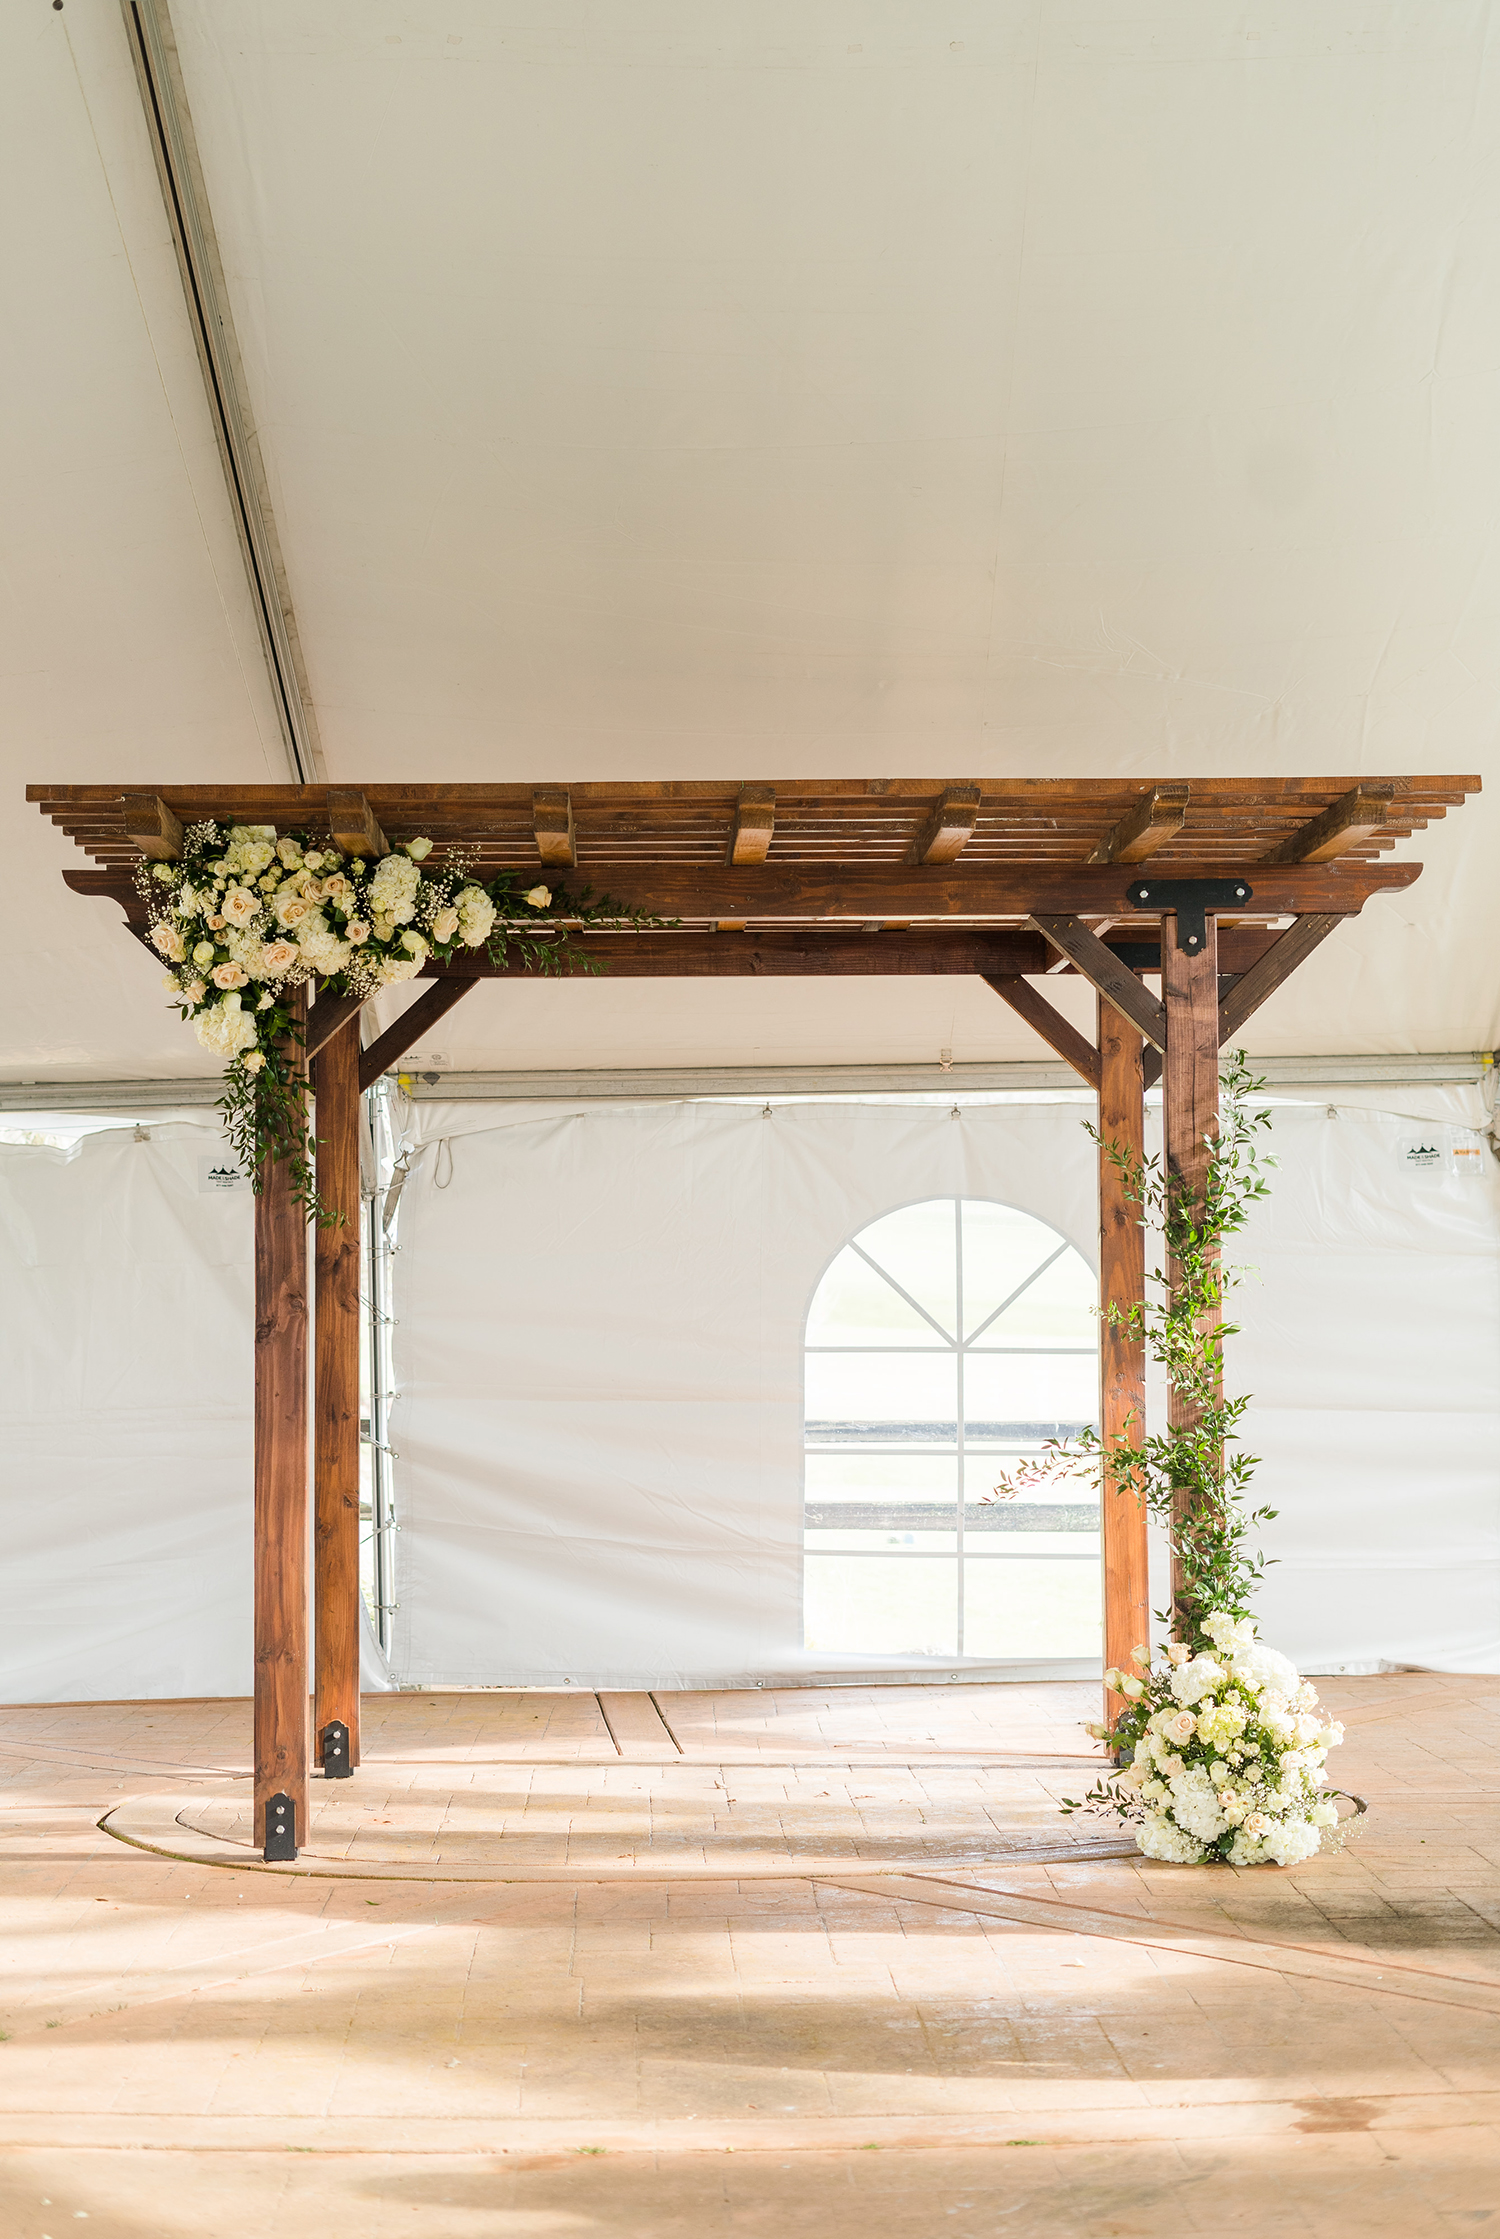 wedding decor inspiration from a wedding at the Ridge Event Center by Adrienne and Dani Photography